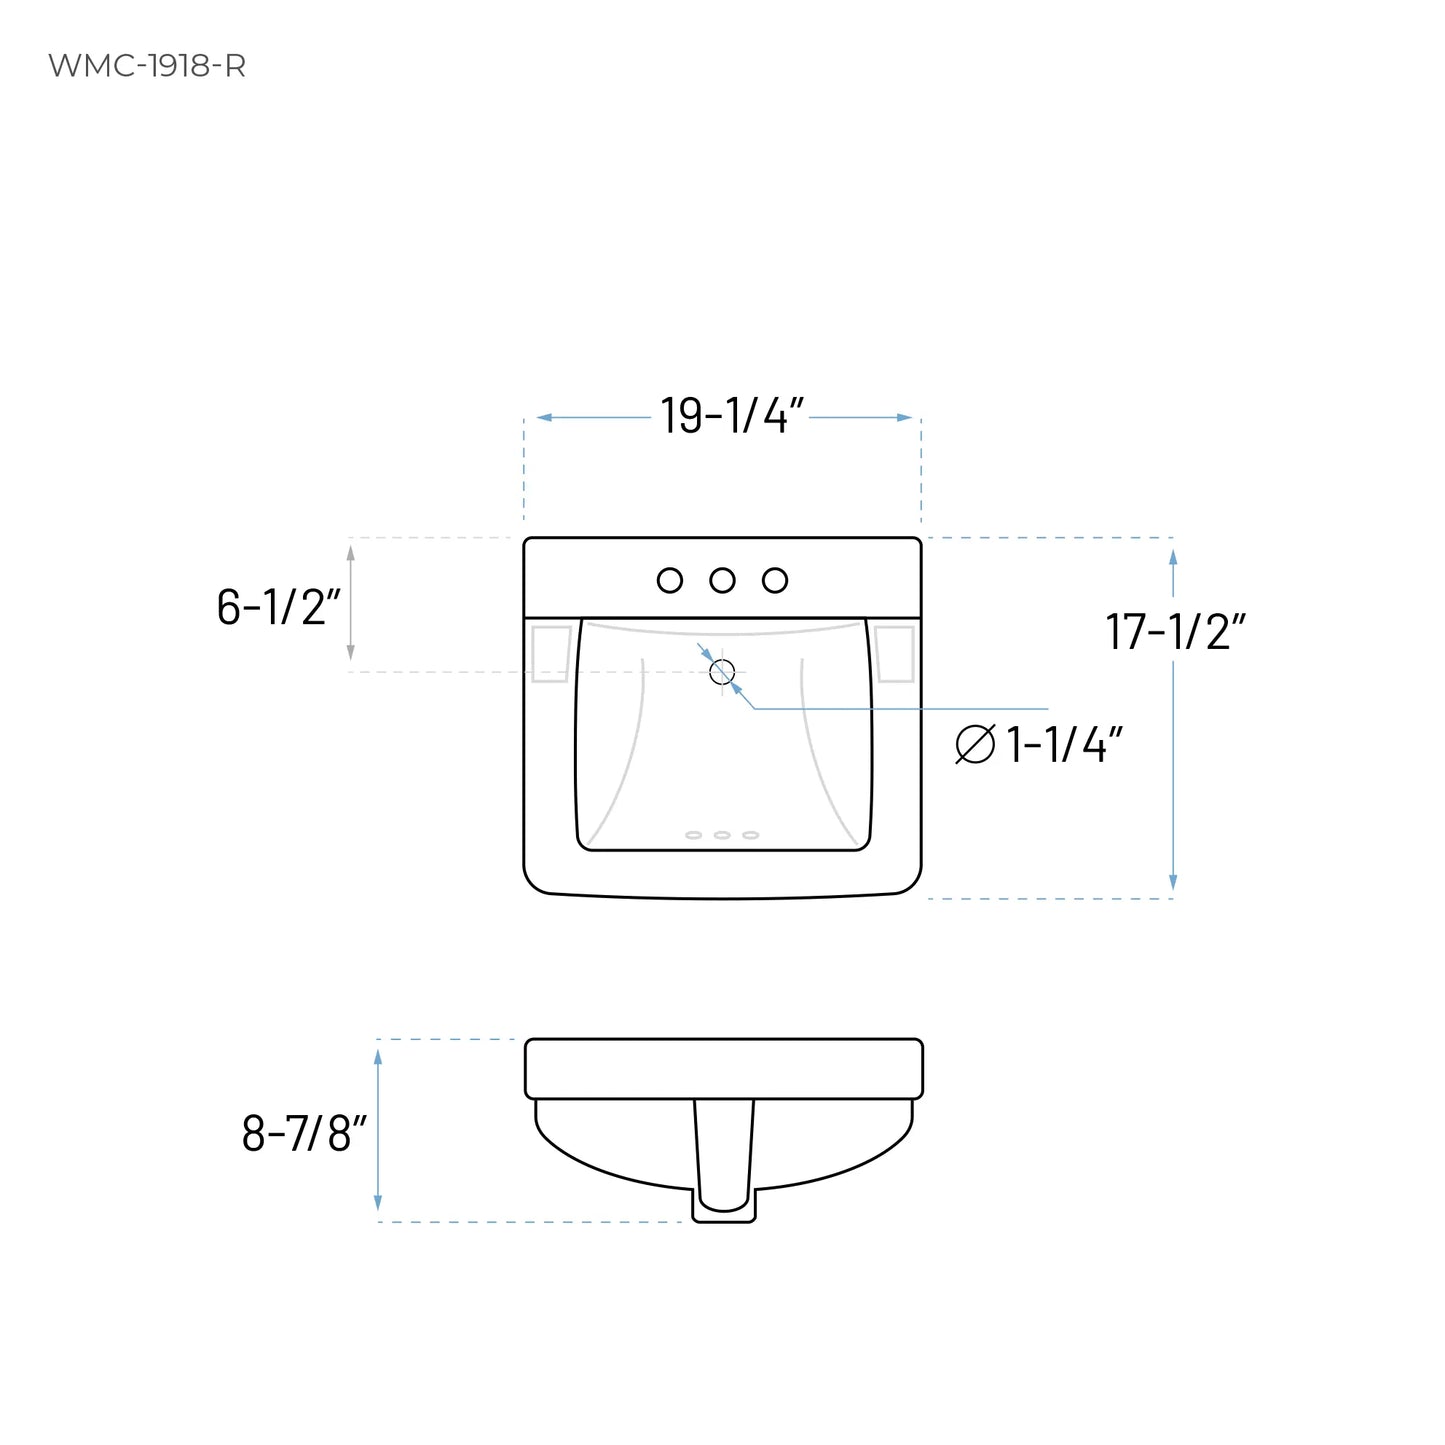 Technical Drawing of a Bathroom Sink